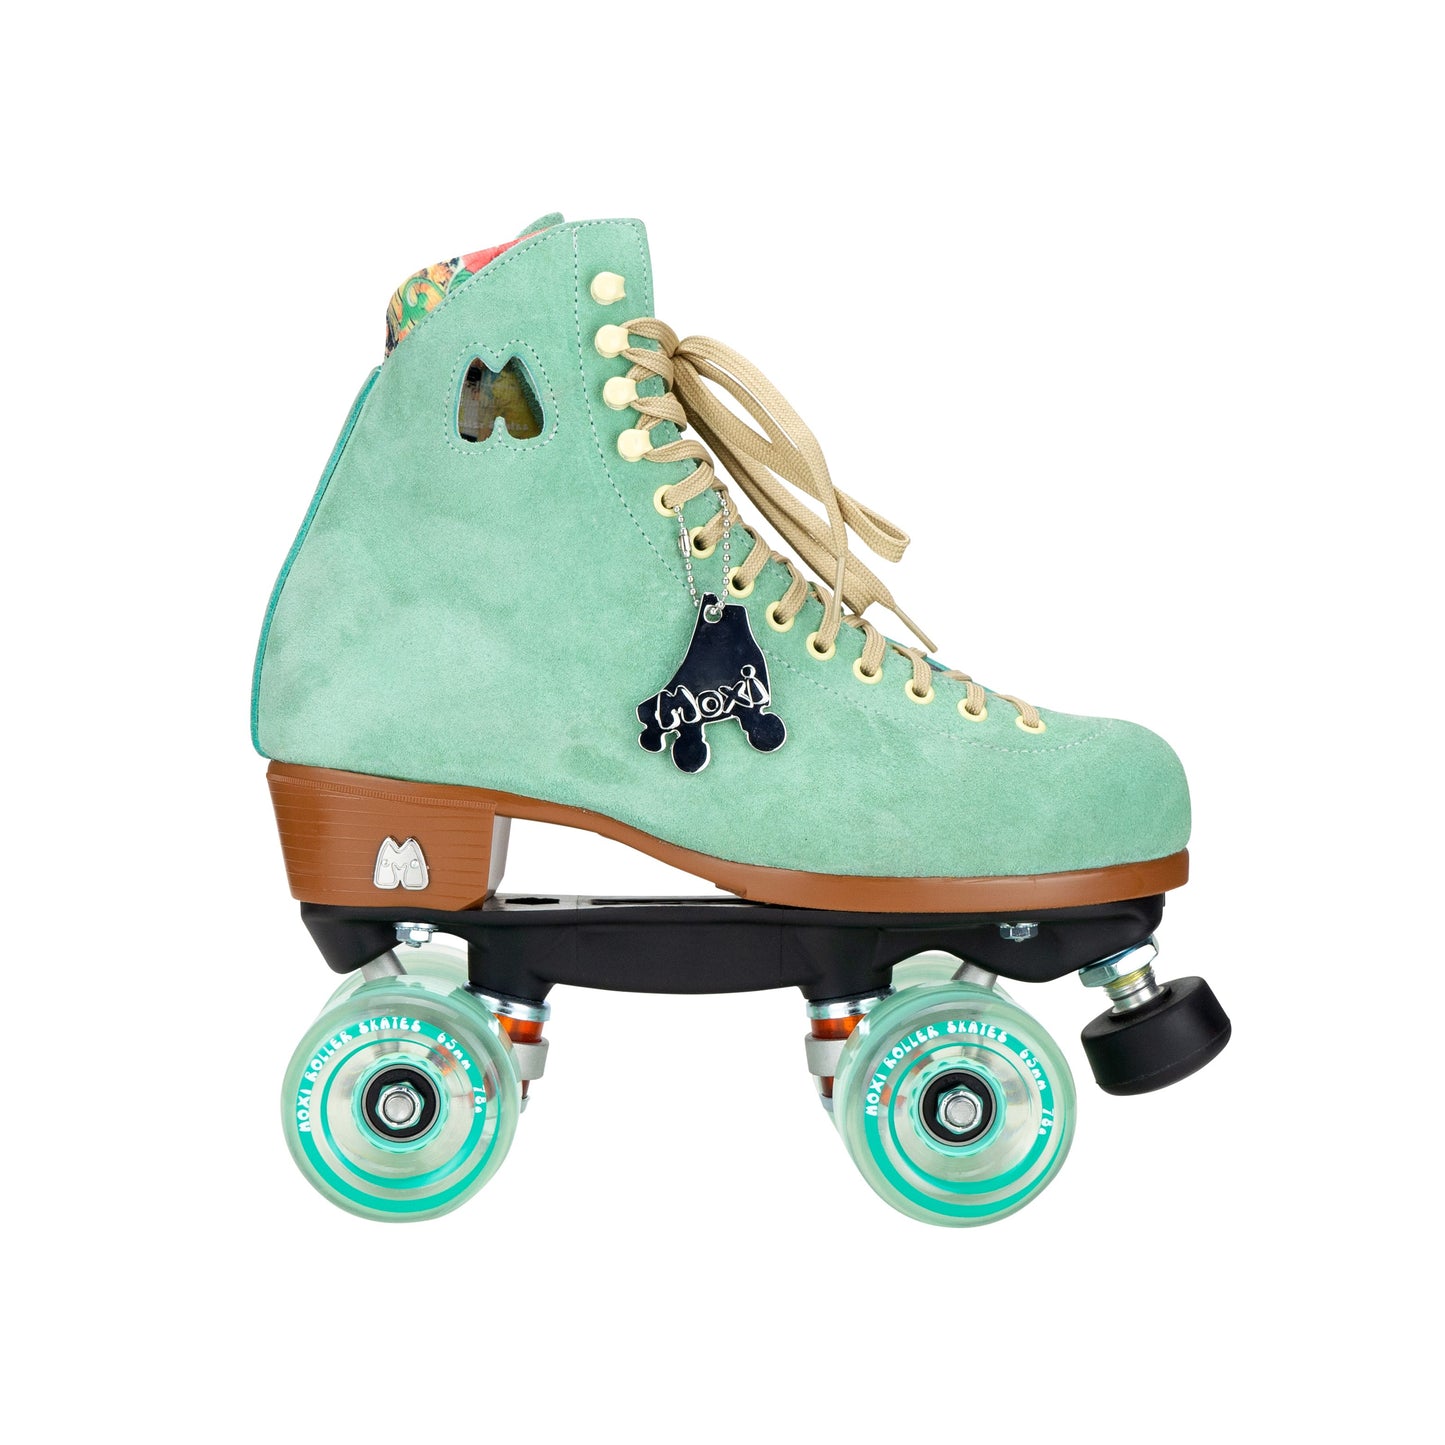 Come to Fresa's Roller Skate shop in Las Vegas and get your Moxi Lollys Skates. These floss Moxi Lolly Roller Skates are ready to the outdoor. Cruise around Las Vegas Art District or come and skate in our indoor skate ramp.